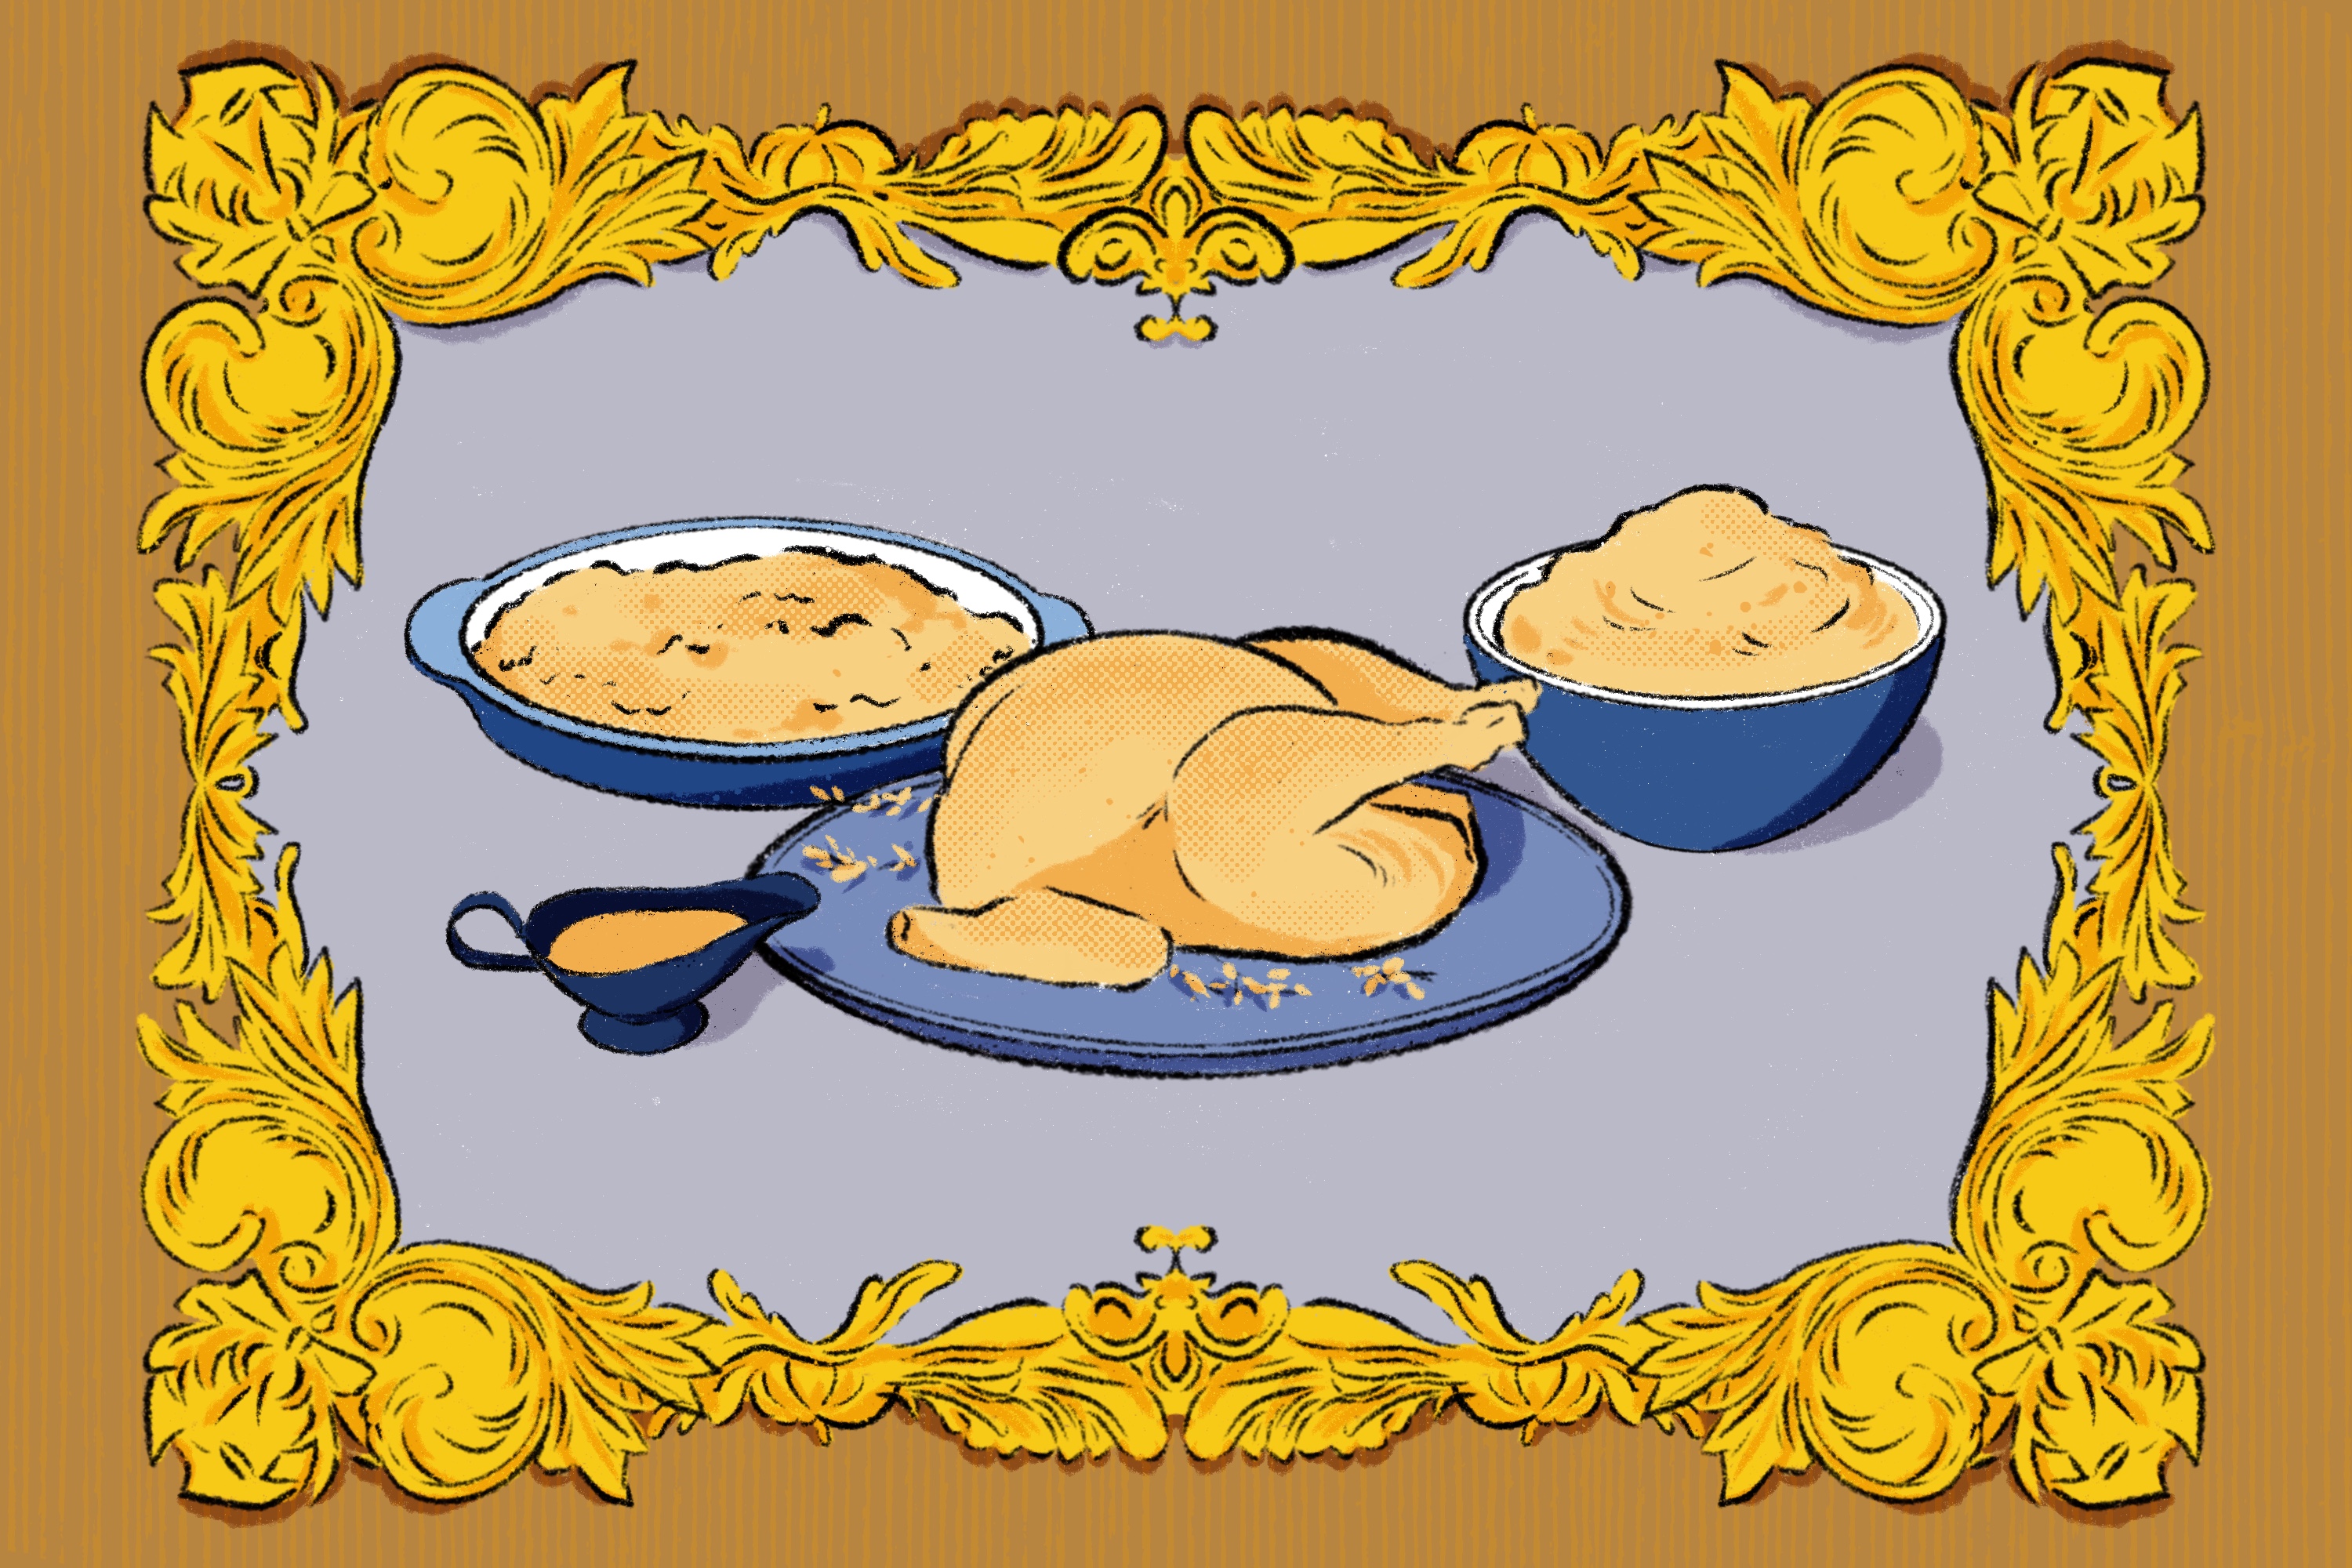 Illustration of turkey, mashed potatoes, and a casserole all the same yellow-beige color, plated on blue plateware.